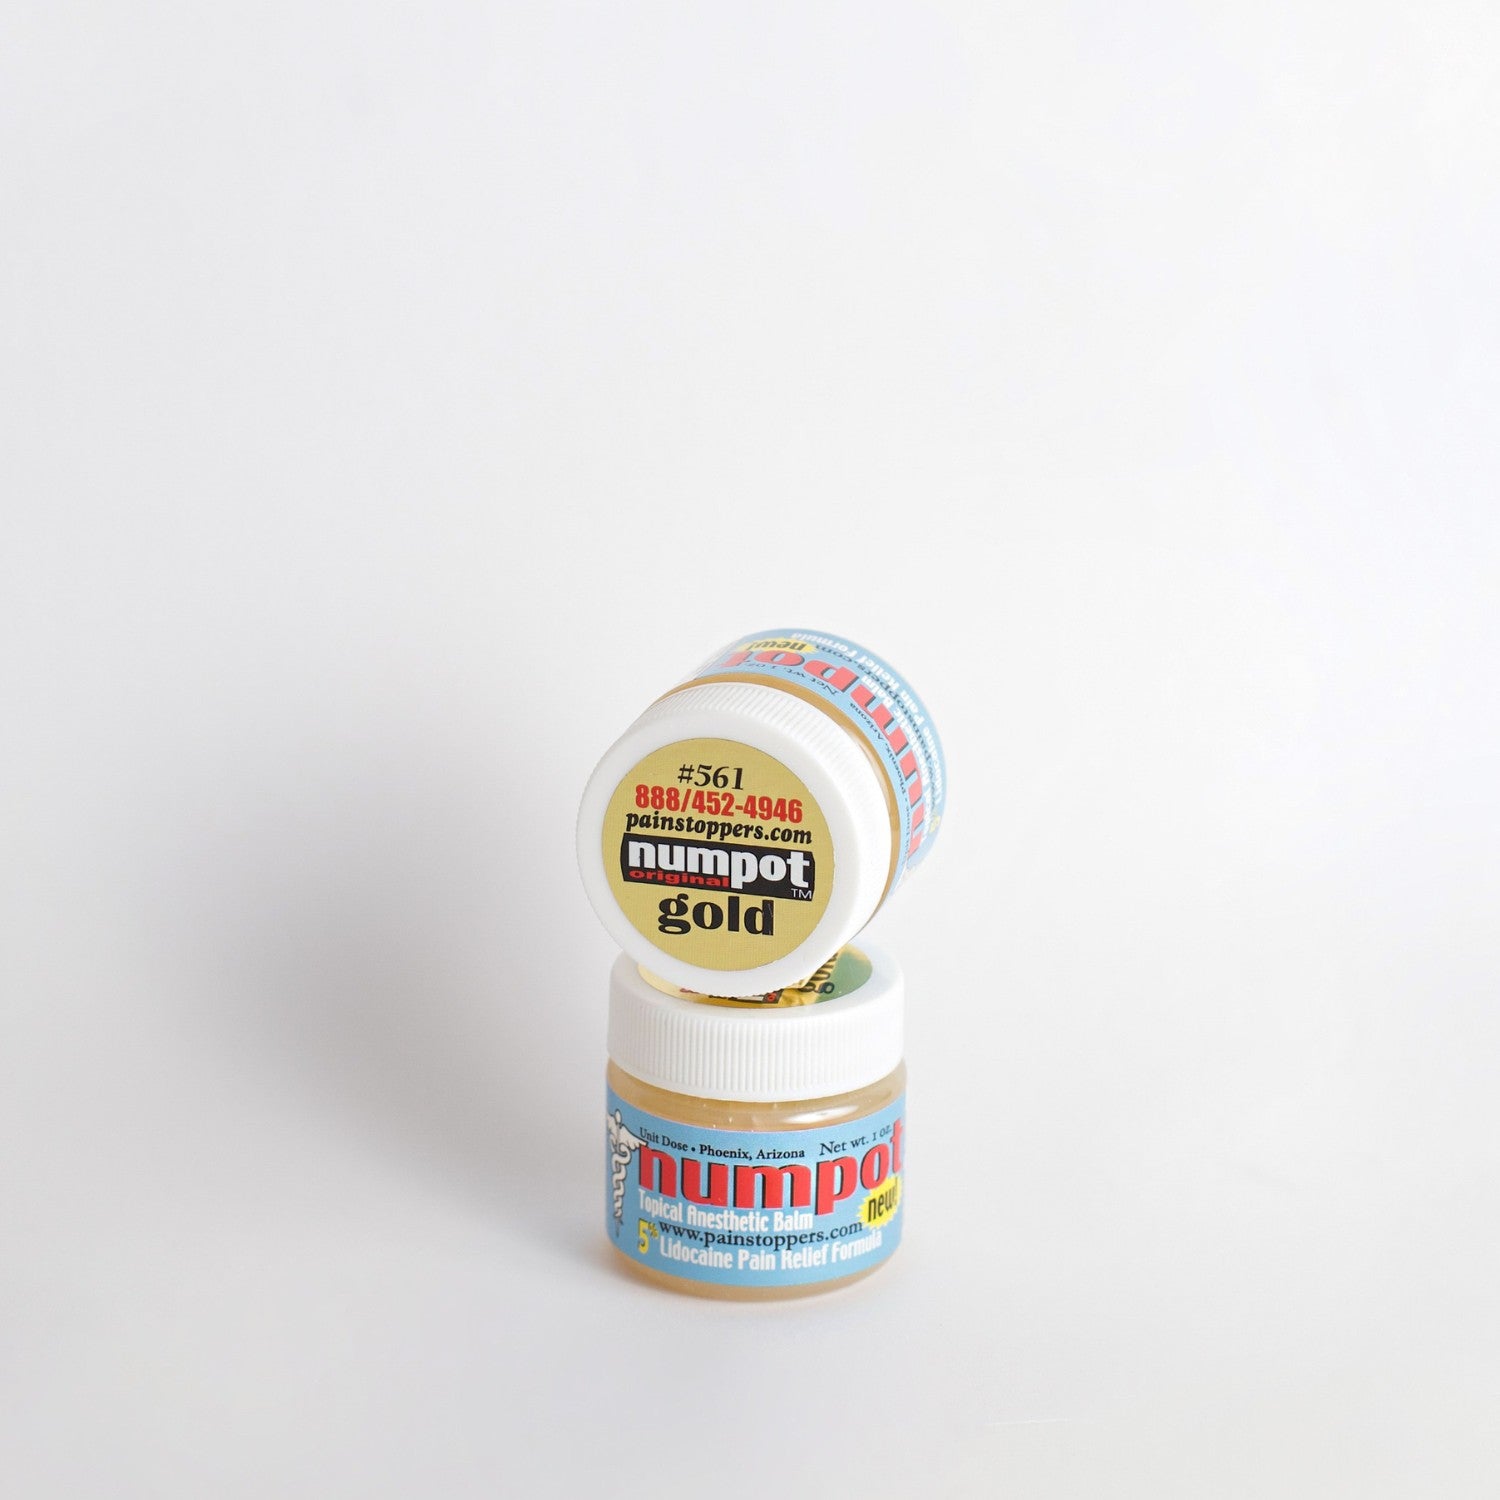 Numpot Gold ointment for Permanent Makeup, Painstoppers, Unit Dose Ltd, Topical Anesthetic Balm stacked